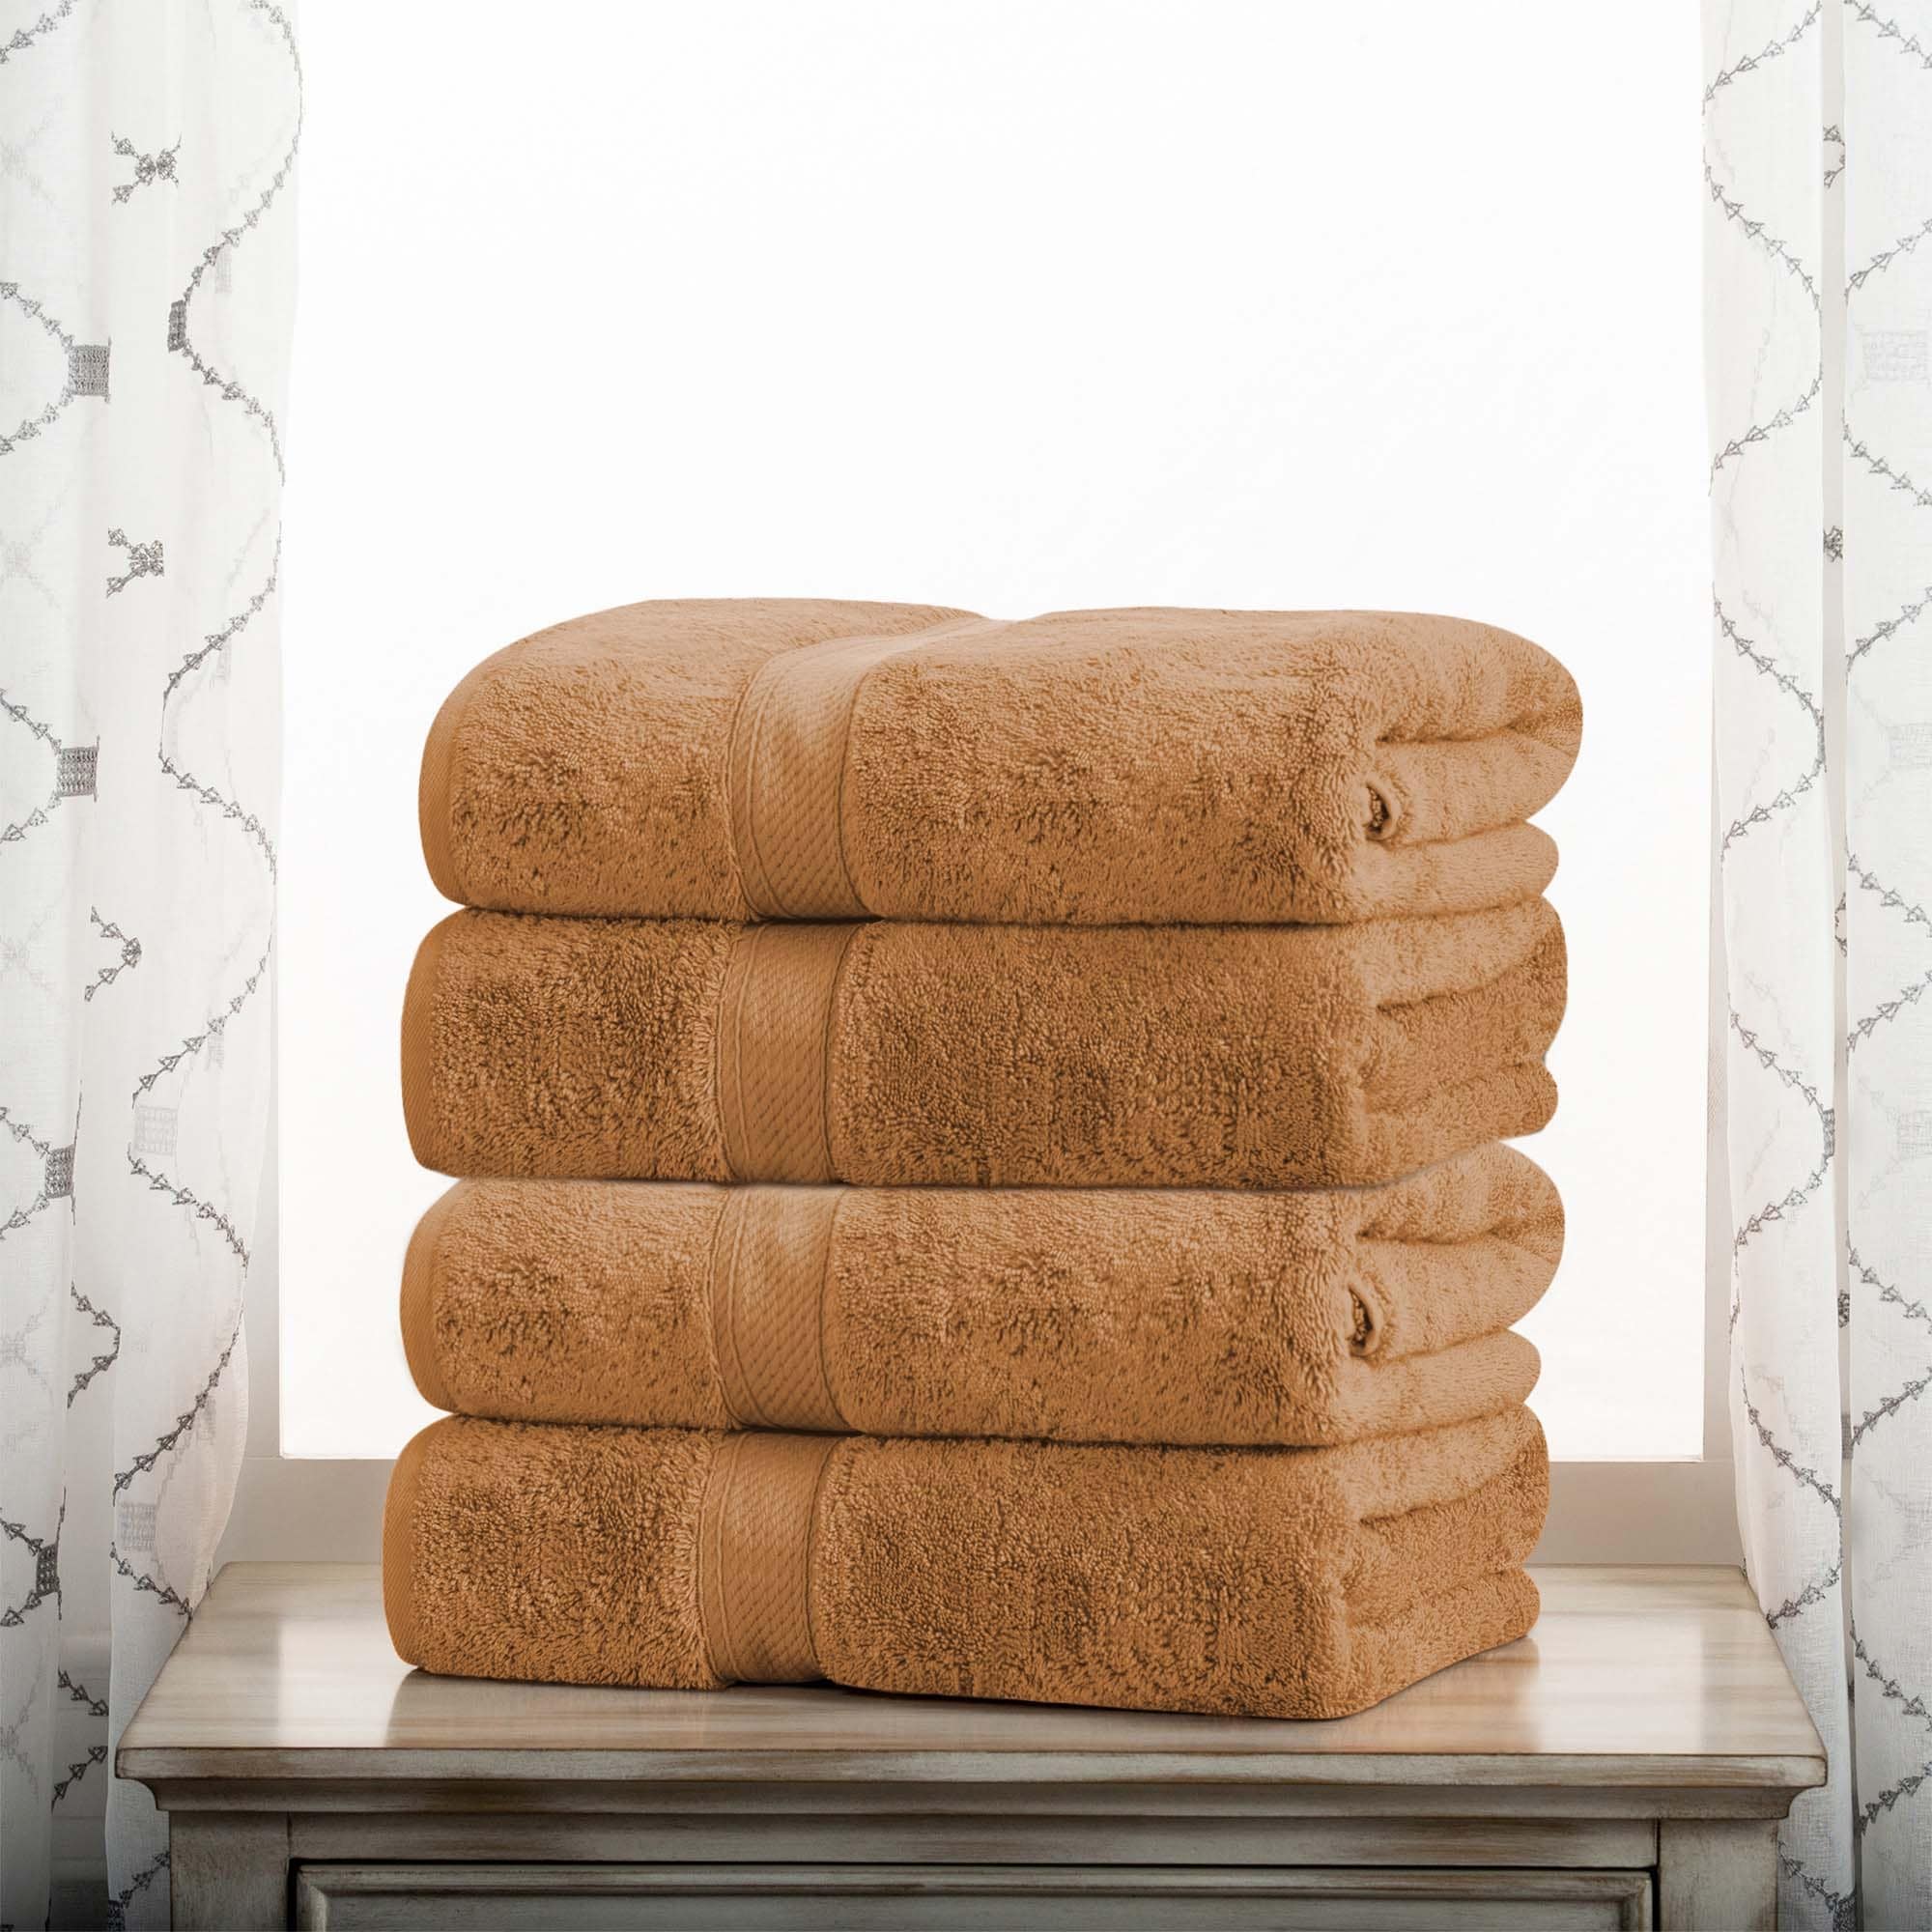 Luxurious 3 Piece Towel Set 100% Certified Egyptian Cotton Thick